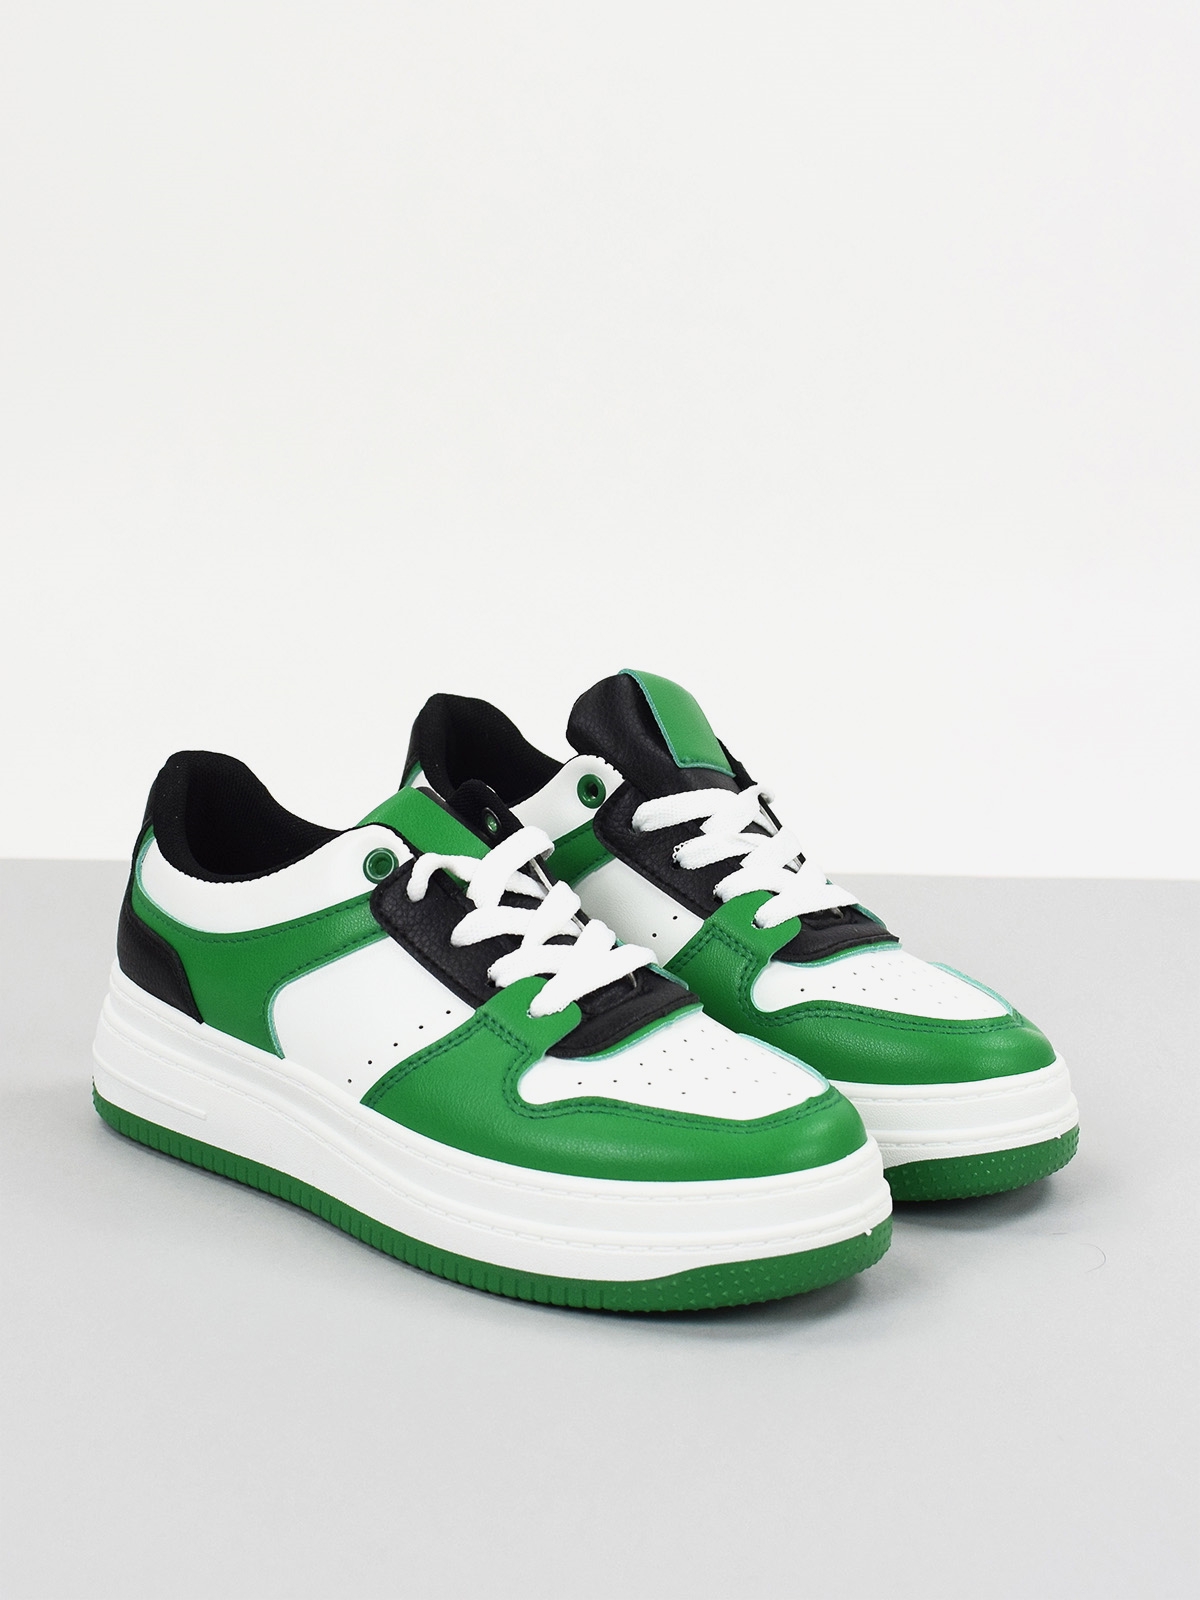 Lace up trainers in green & white